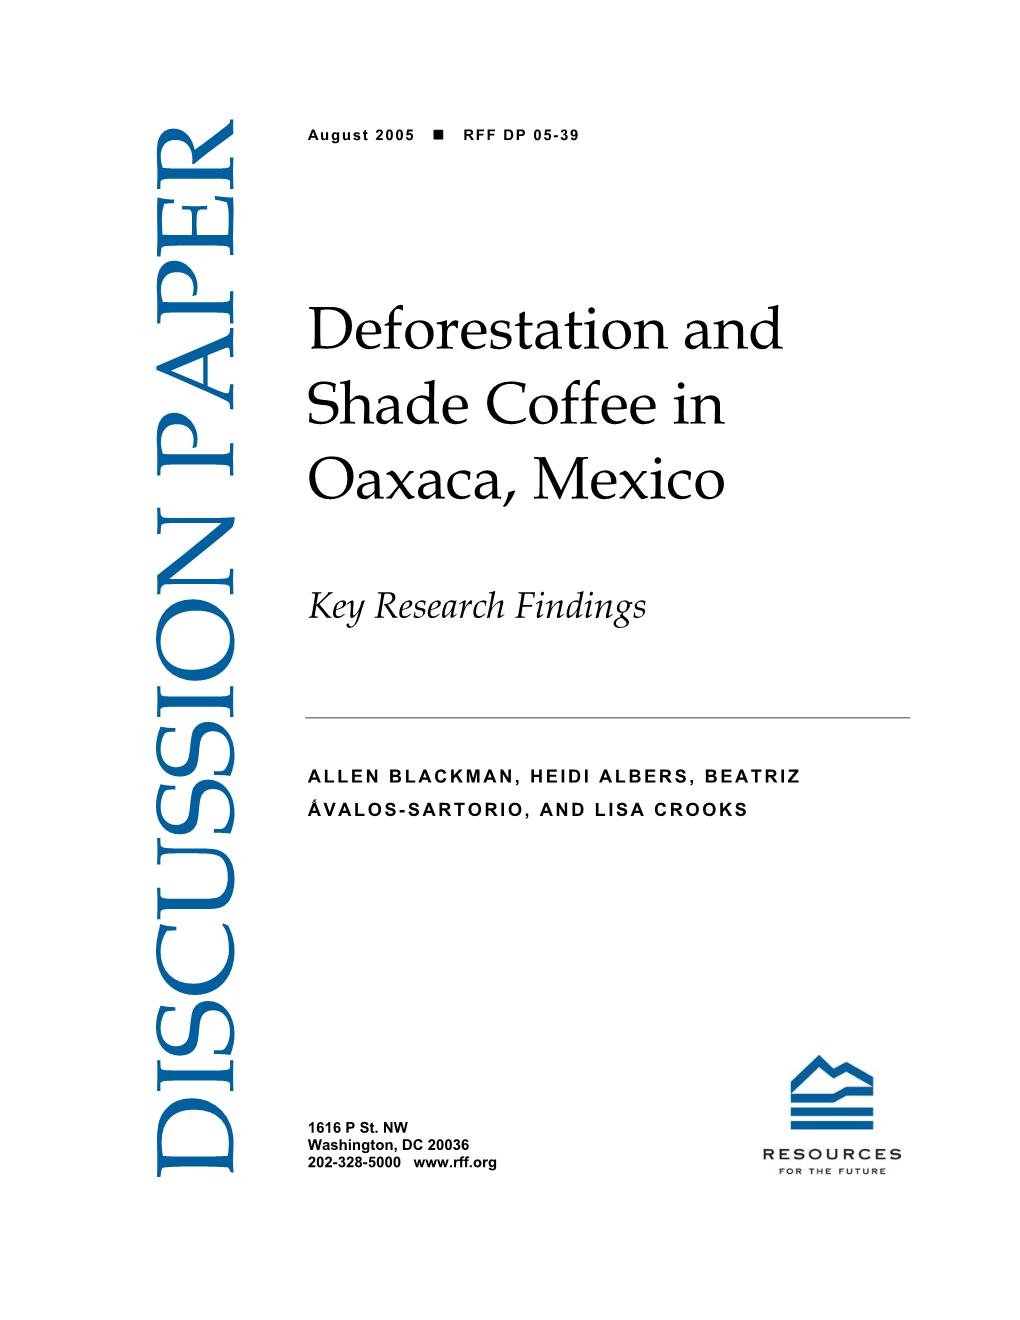 Deforestation and Shade Coffee in Oaxaca, Mexico: Key Research Findings